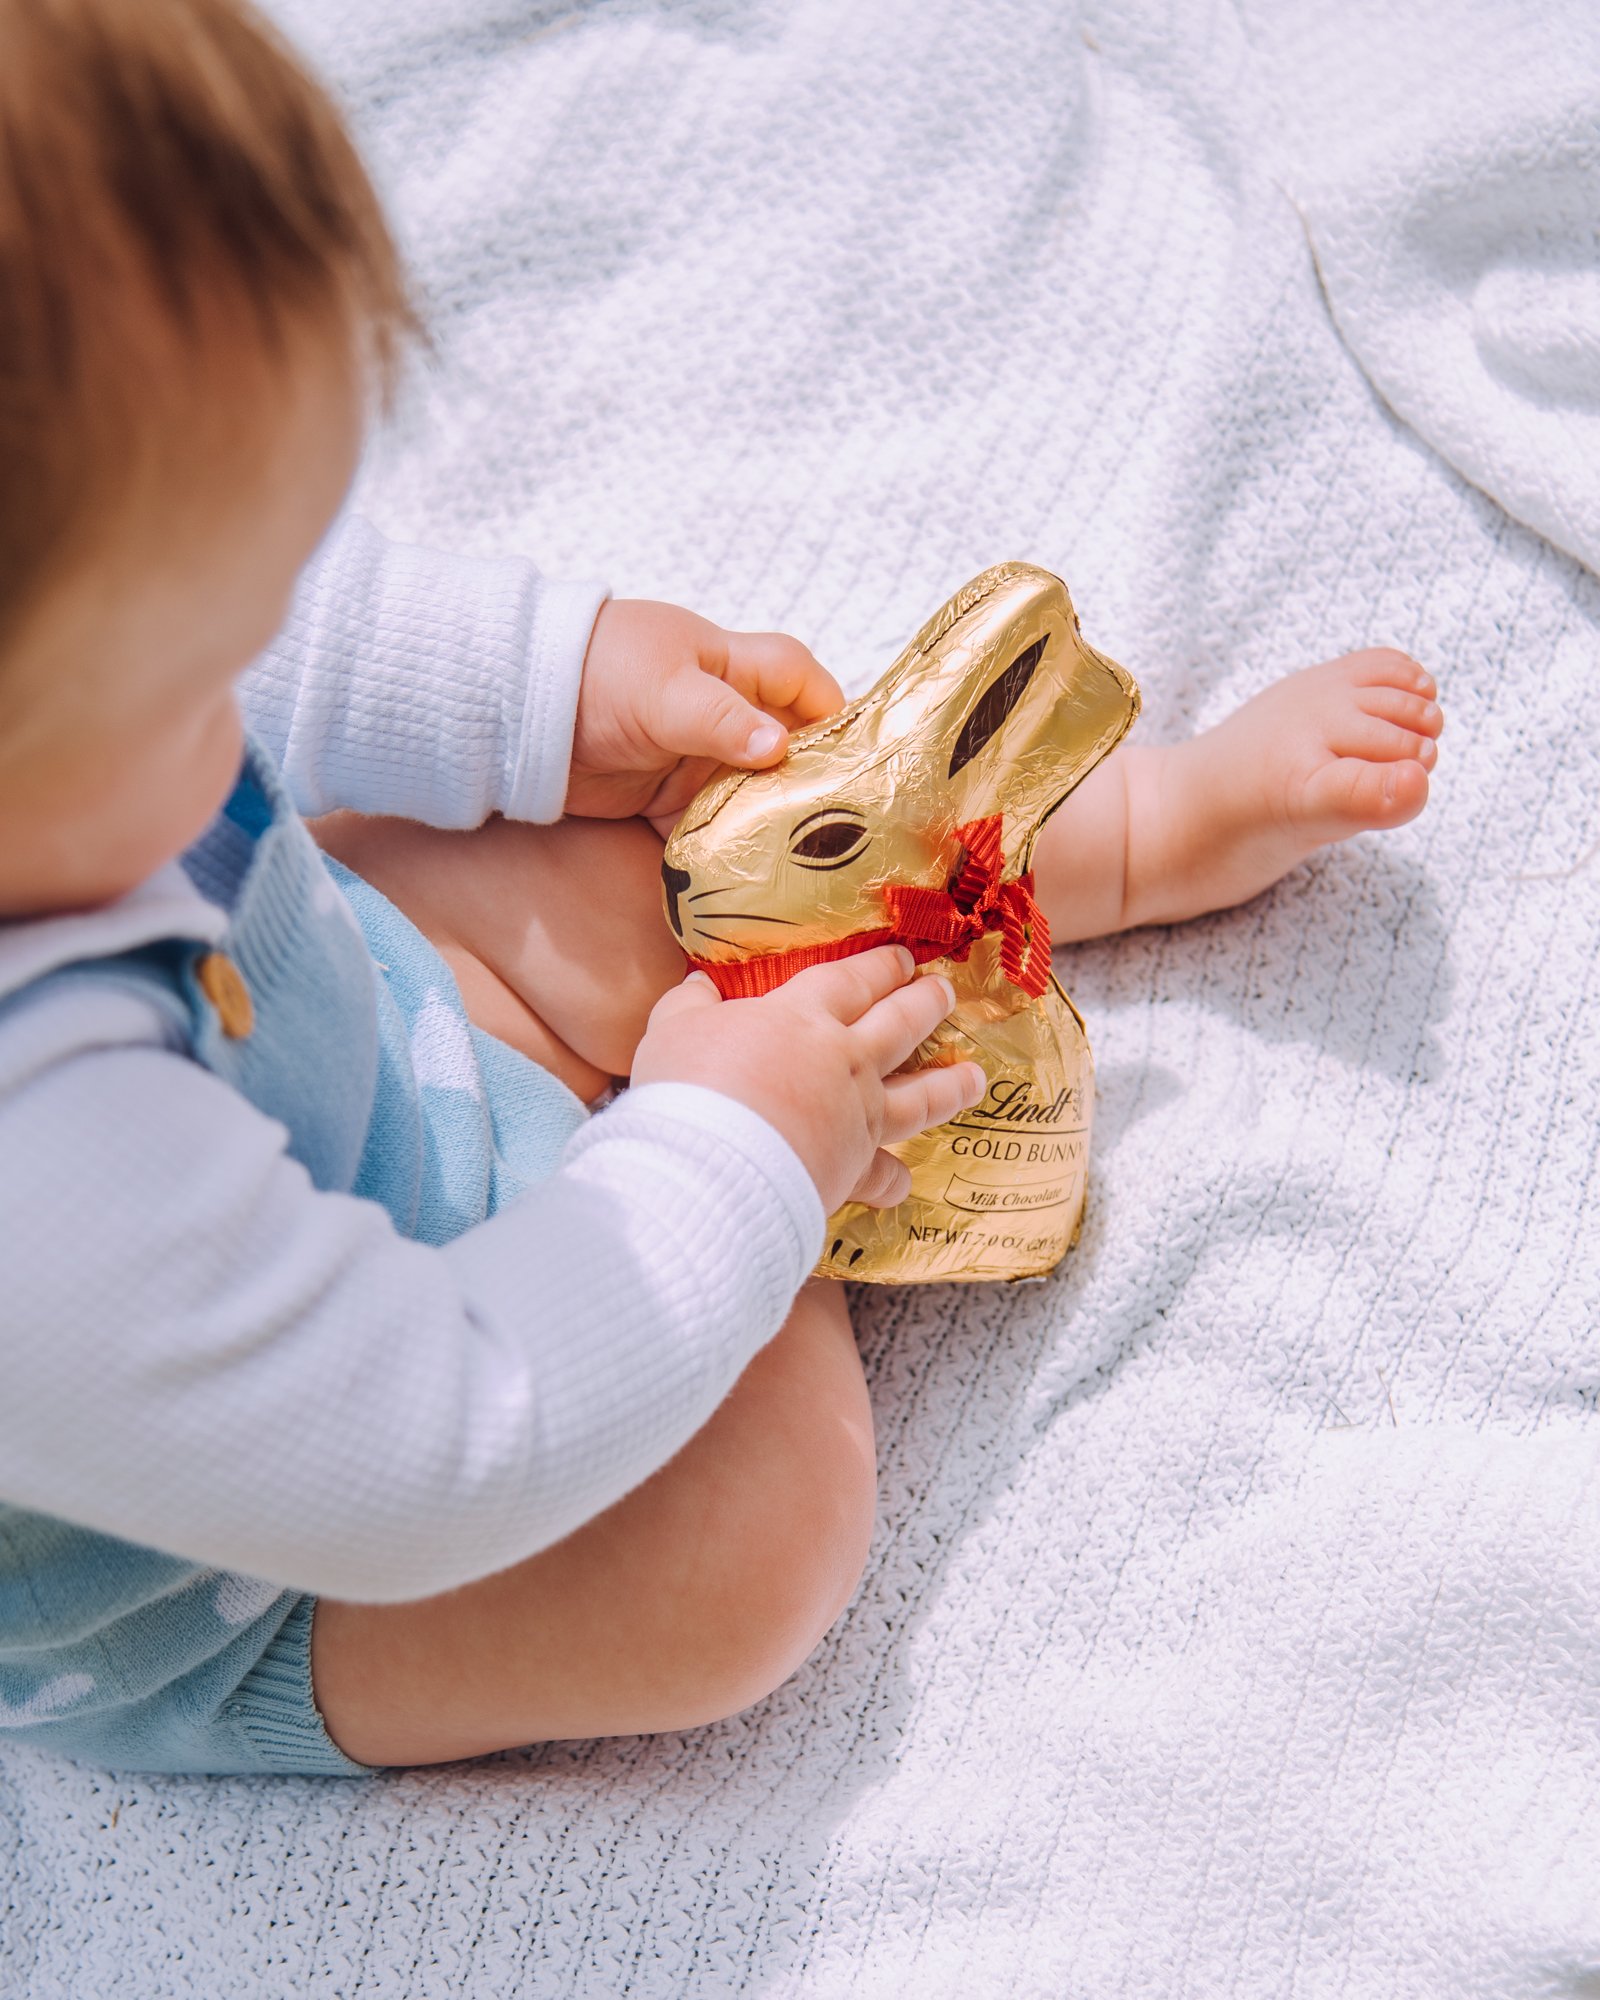 Spring Baby Photoshoot Ideas - Baby with a Chocolate Bunny